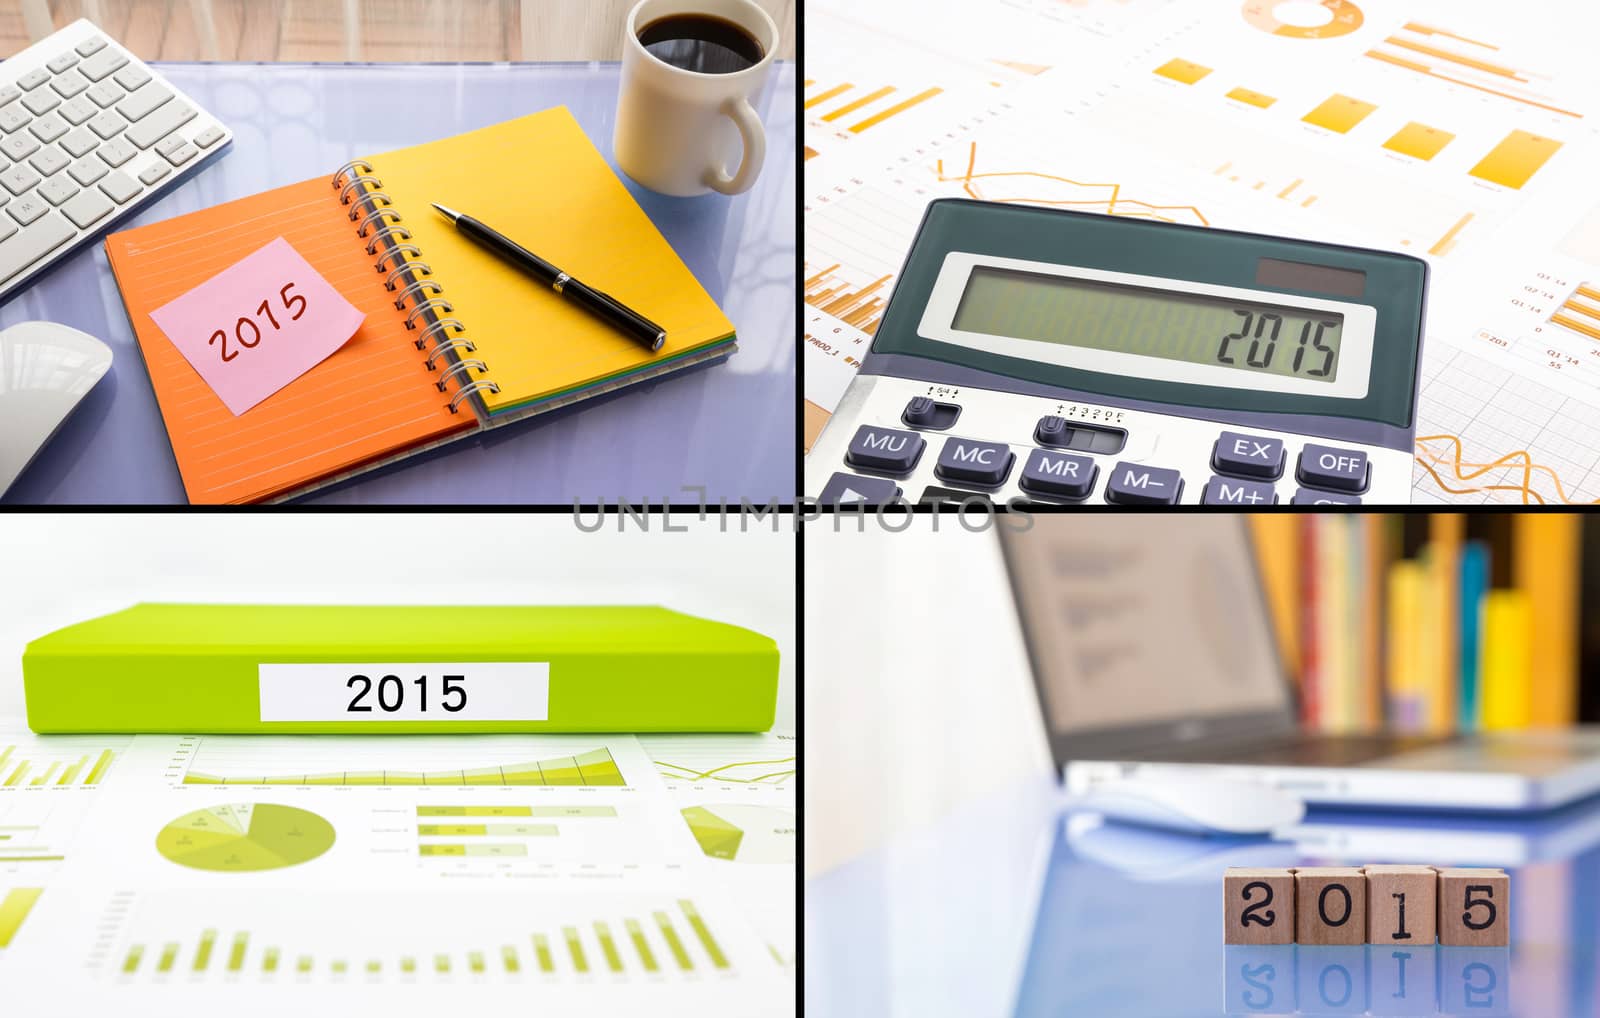 Year resolutions 2015 for work planning, business collection theme images, collage set of four photos